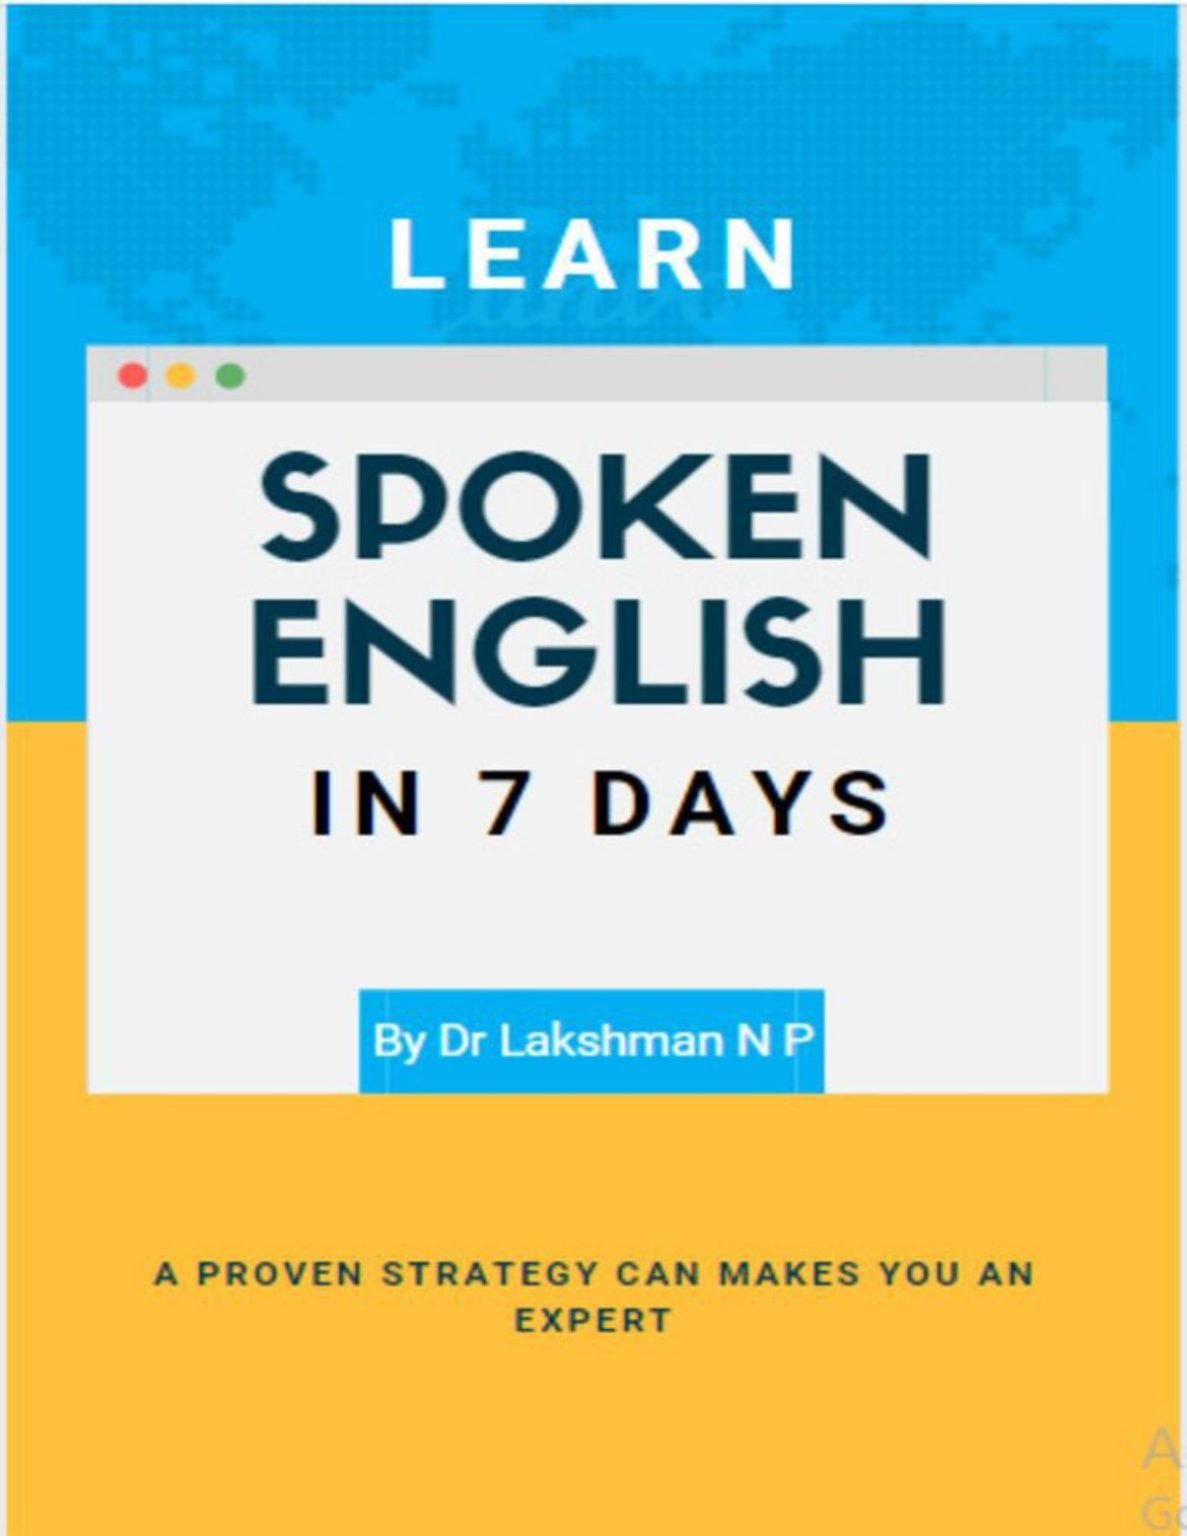 Rich results on Google's SERP when searching for ''Learn-spoken-English-in-7-days''